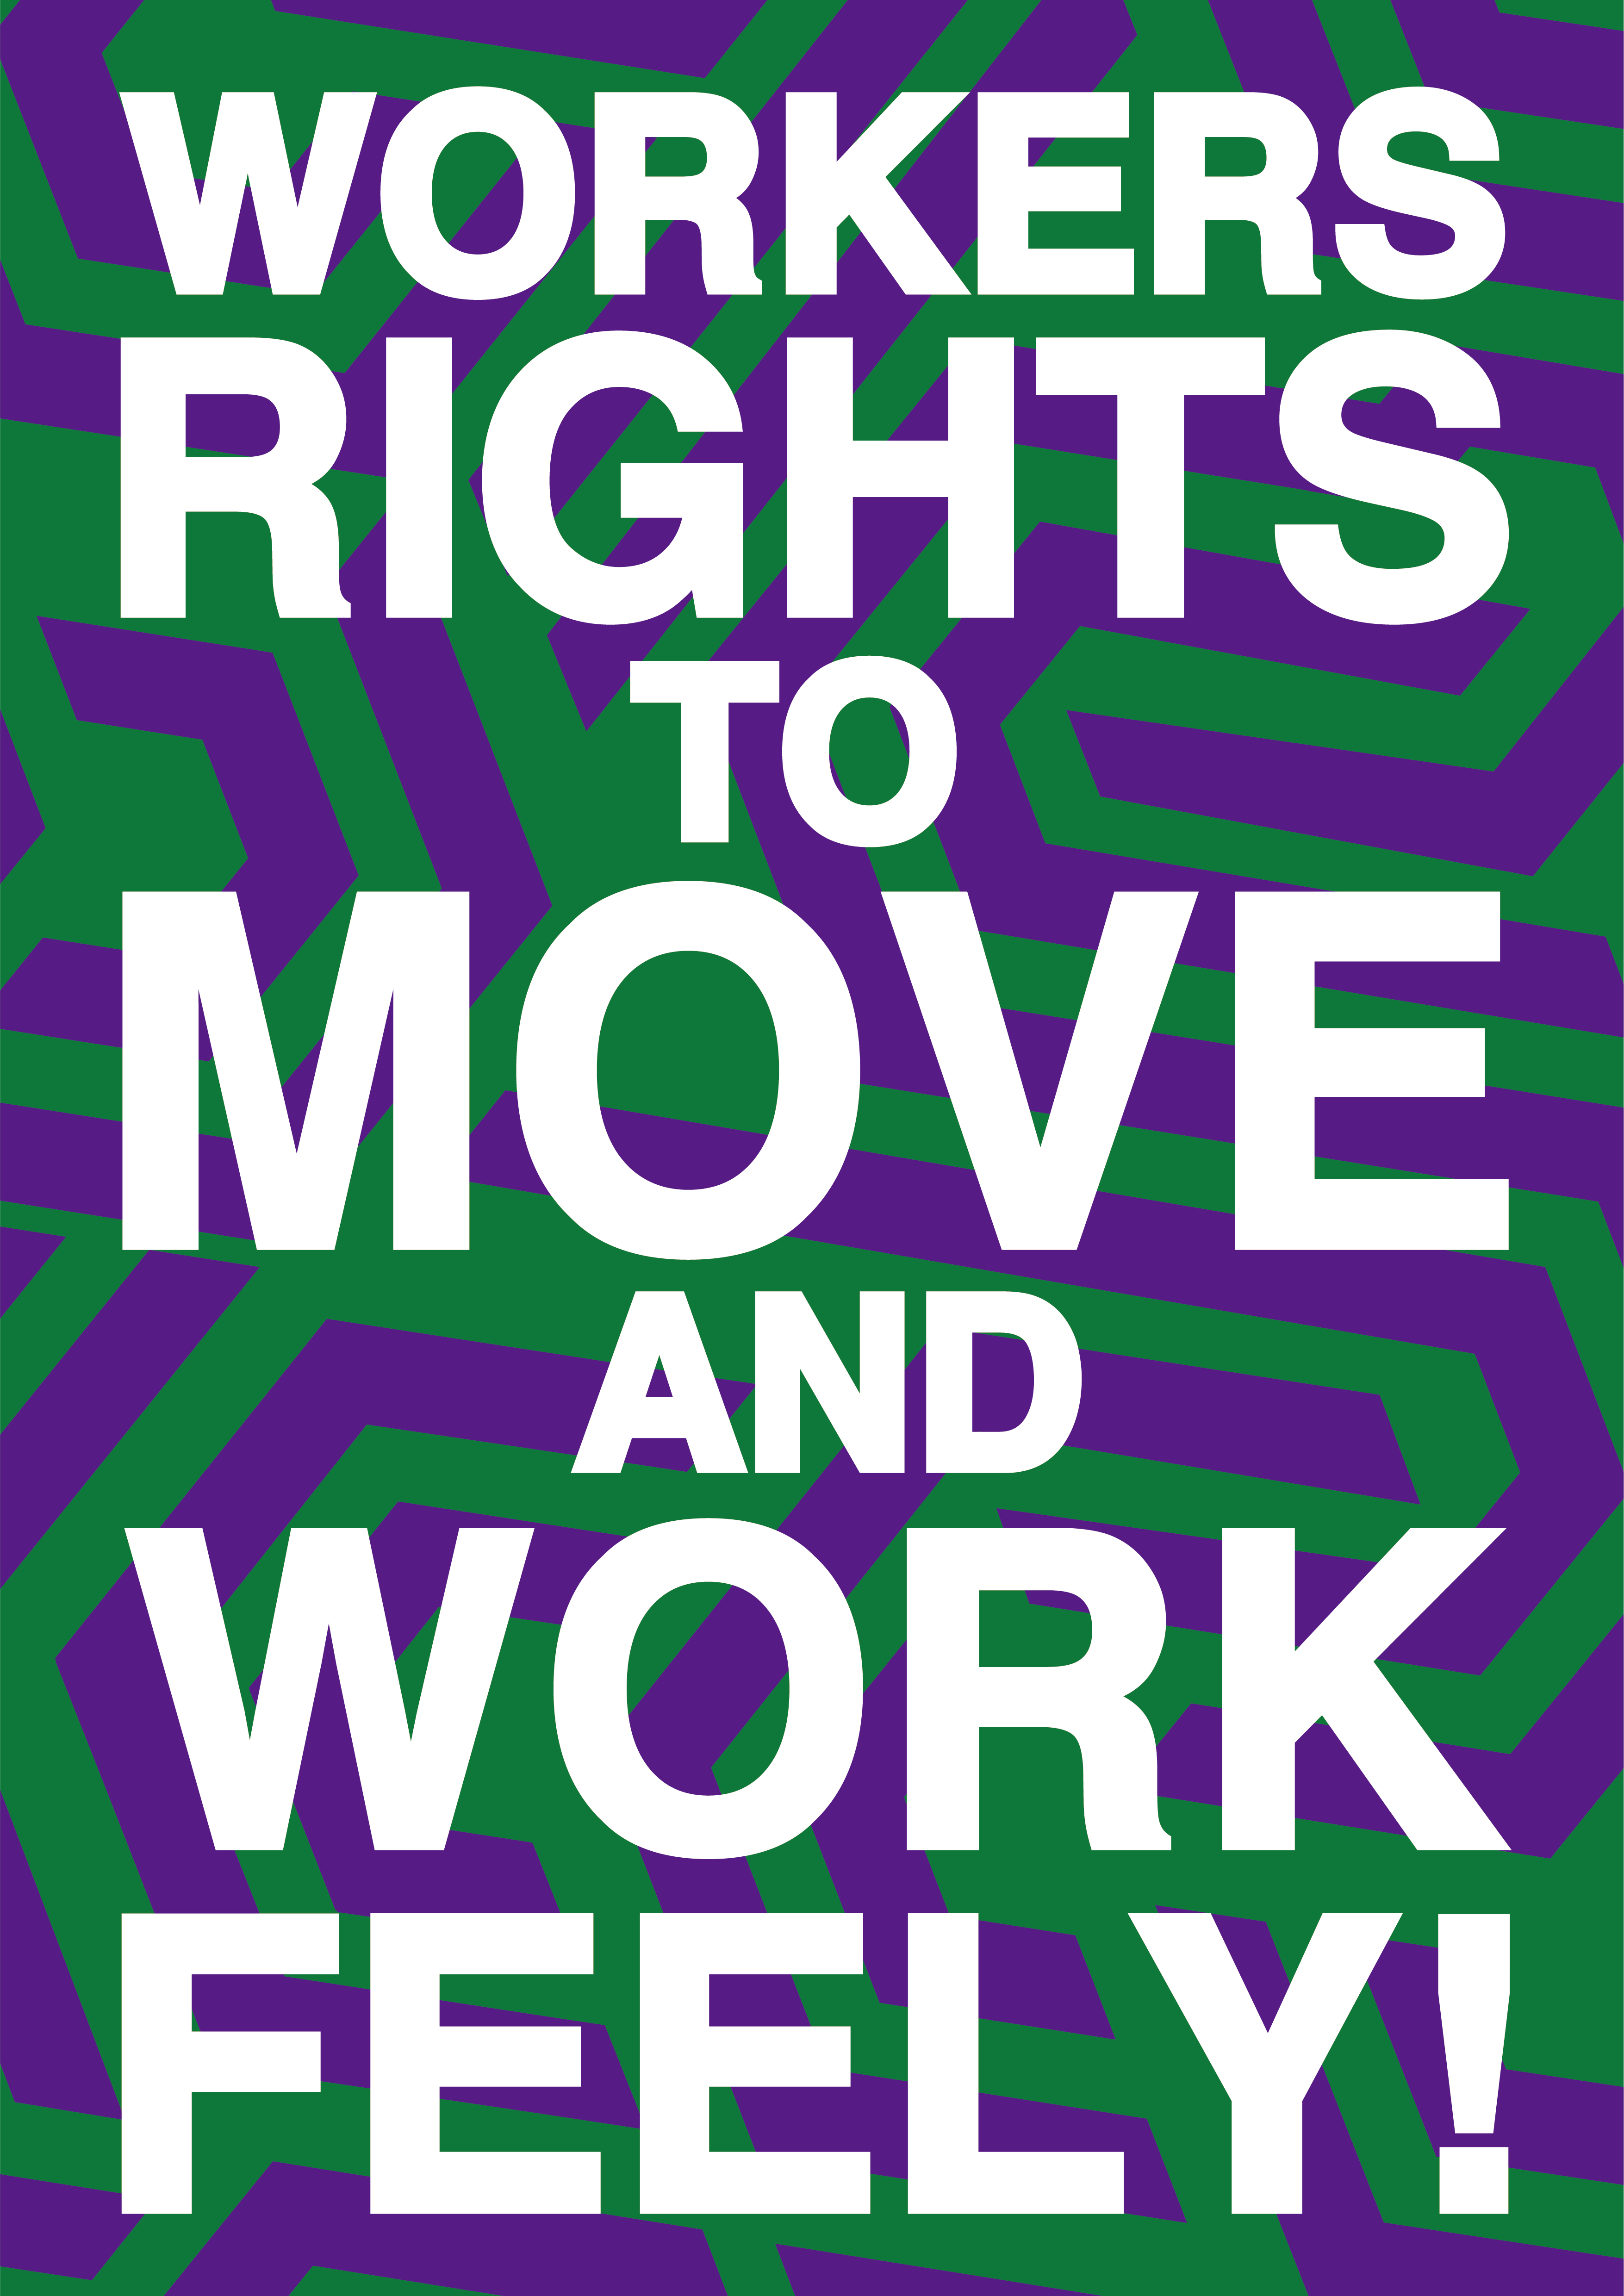 Workers Rights to move and work feely! 